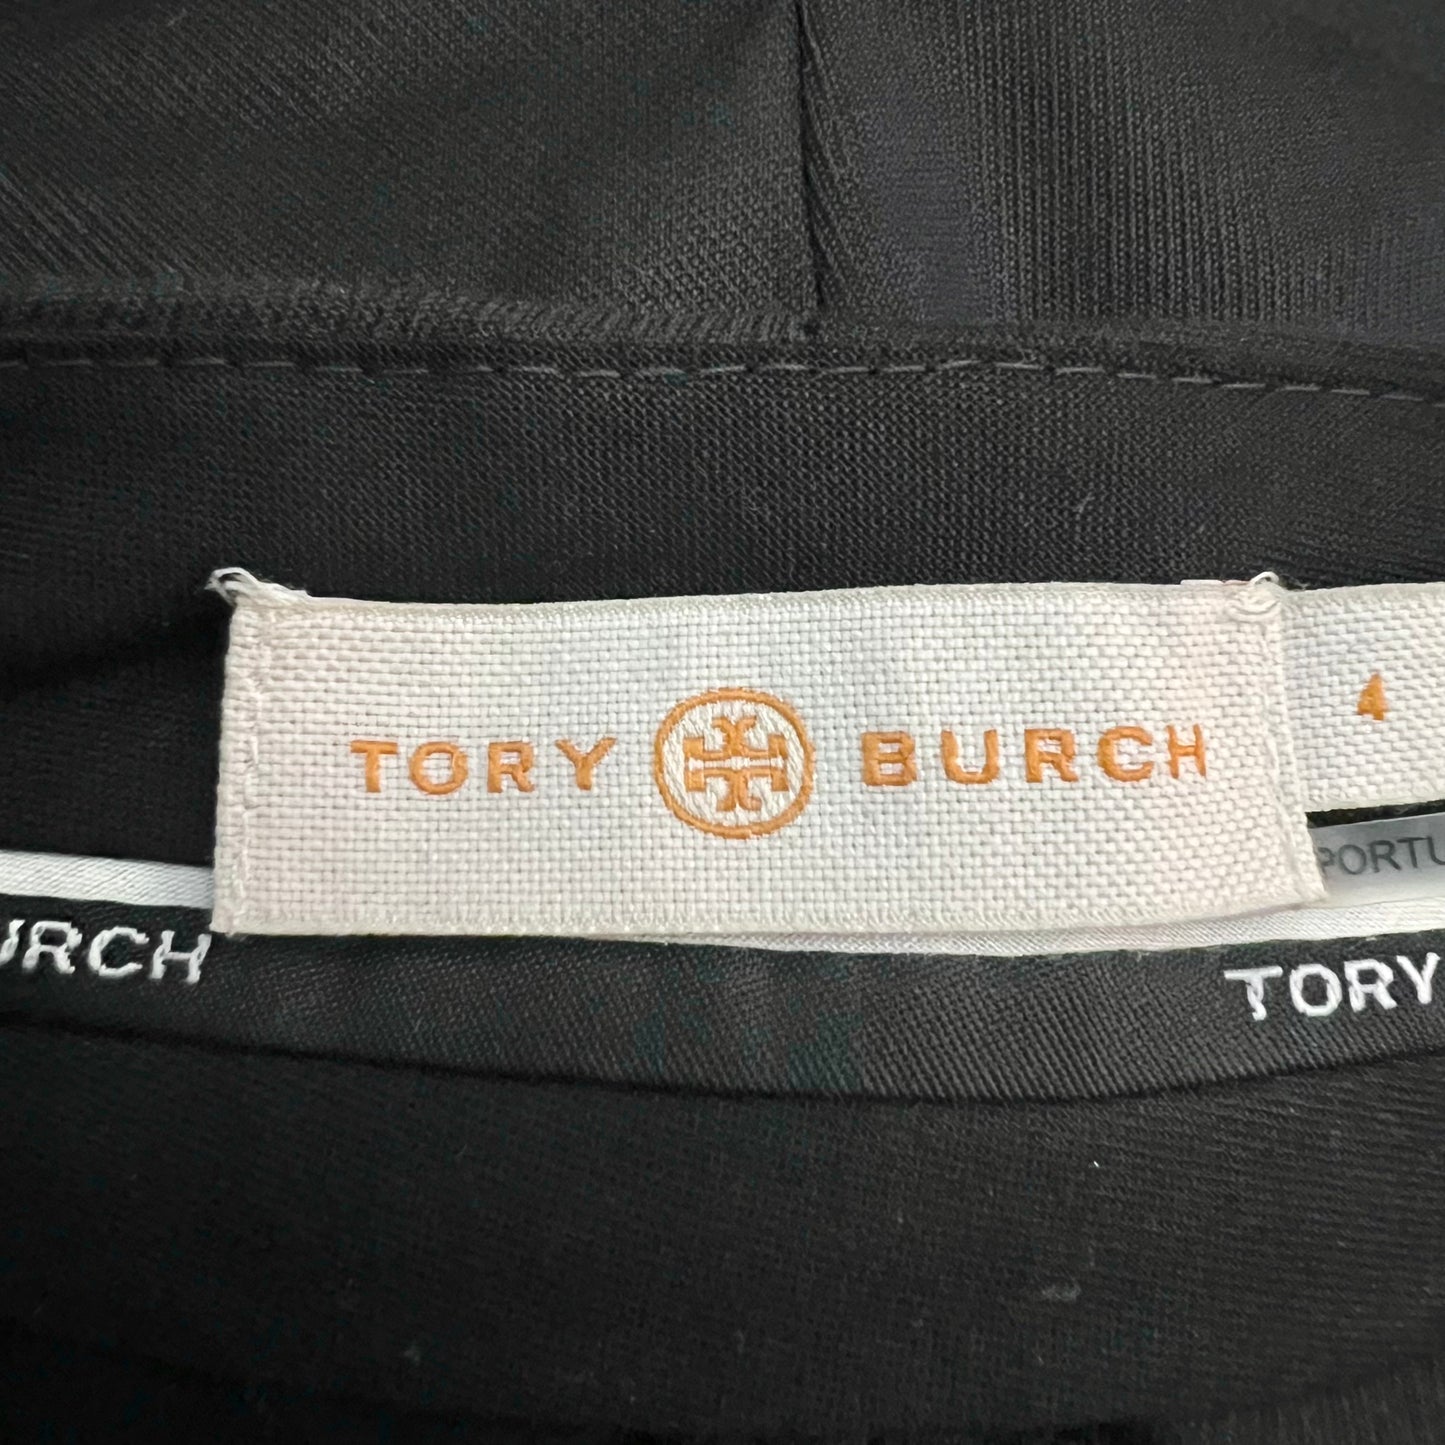 Pants Designer By Tory Burch  Size: 4